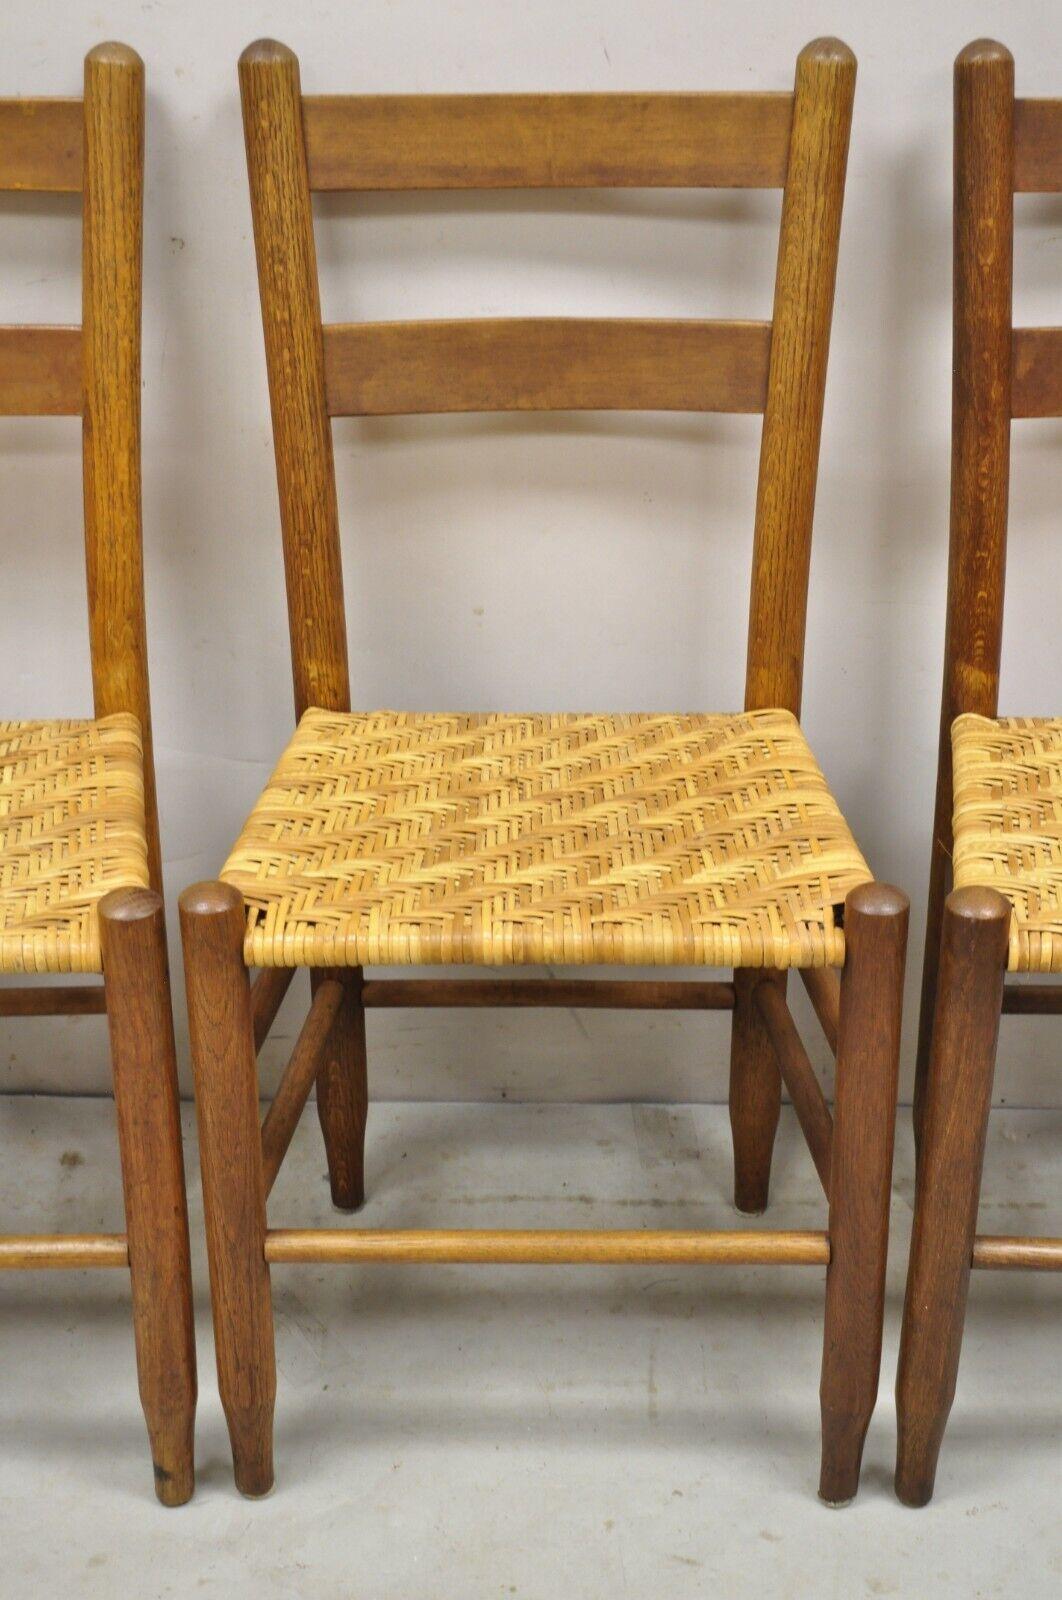 20th Century French Country Primitive Oak Ladderback Small Rattan Dining Chairs, Set of 4